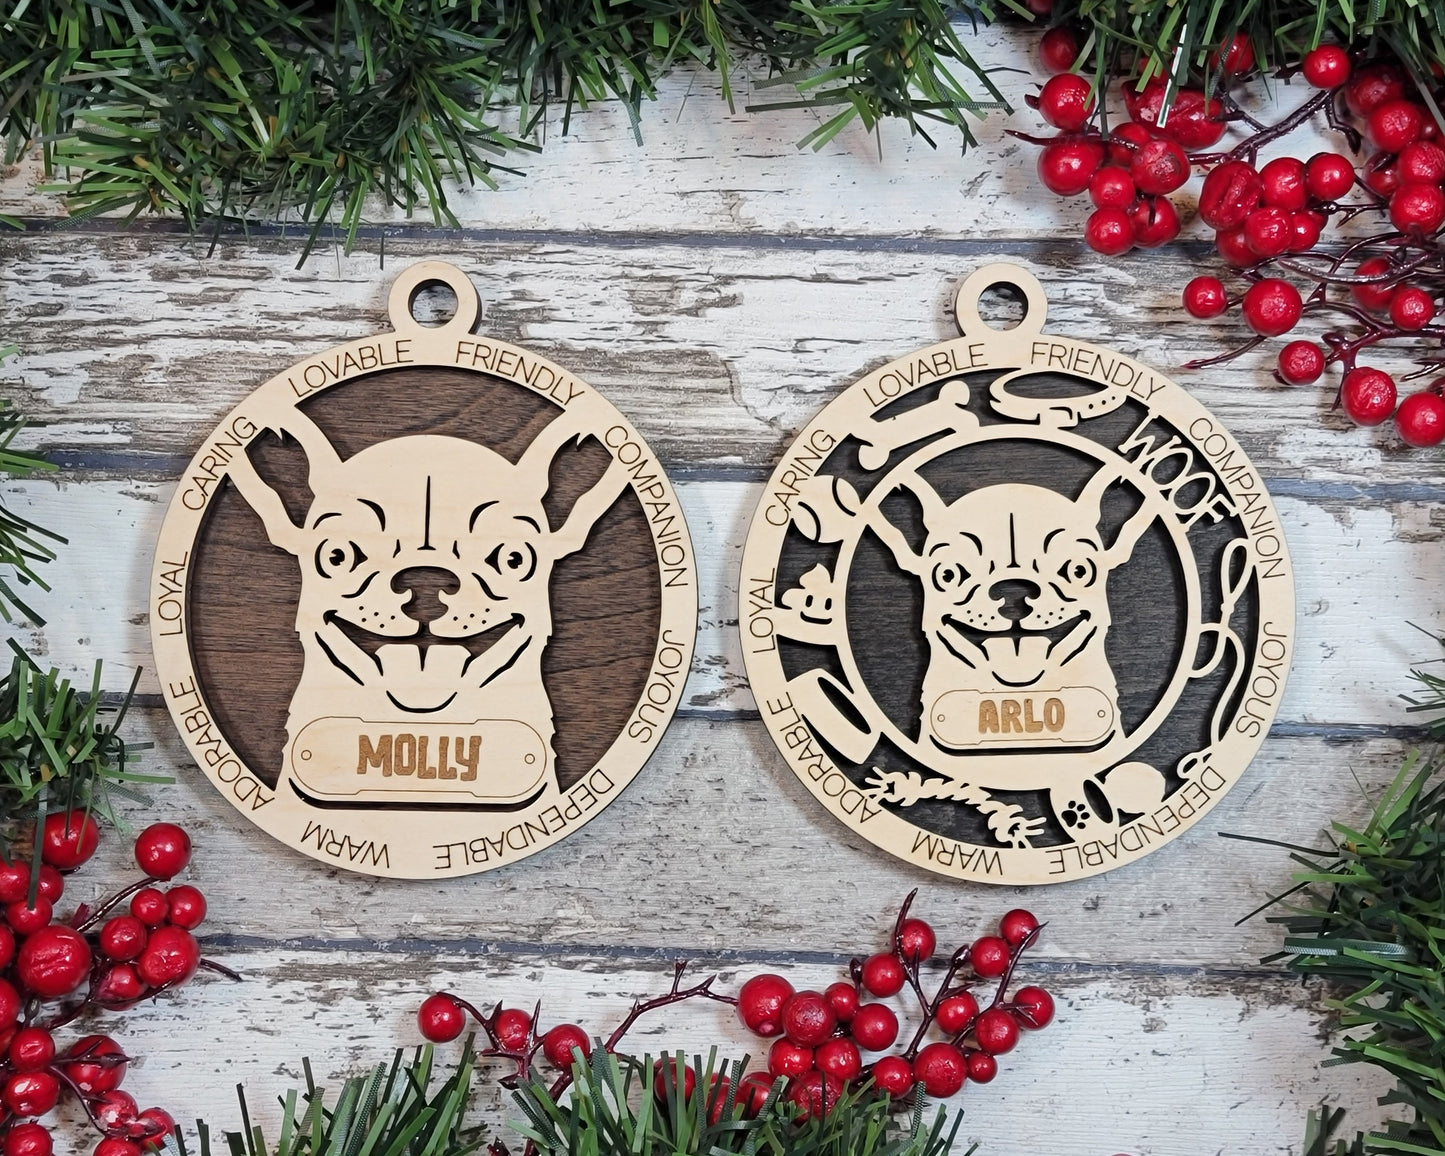 Chihuahua - Adorable Dog Ornaments - 2 Ornaments included - SVG, PDF, AI File Download - Sized for Glowforge